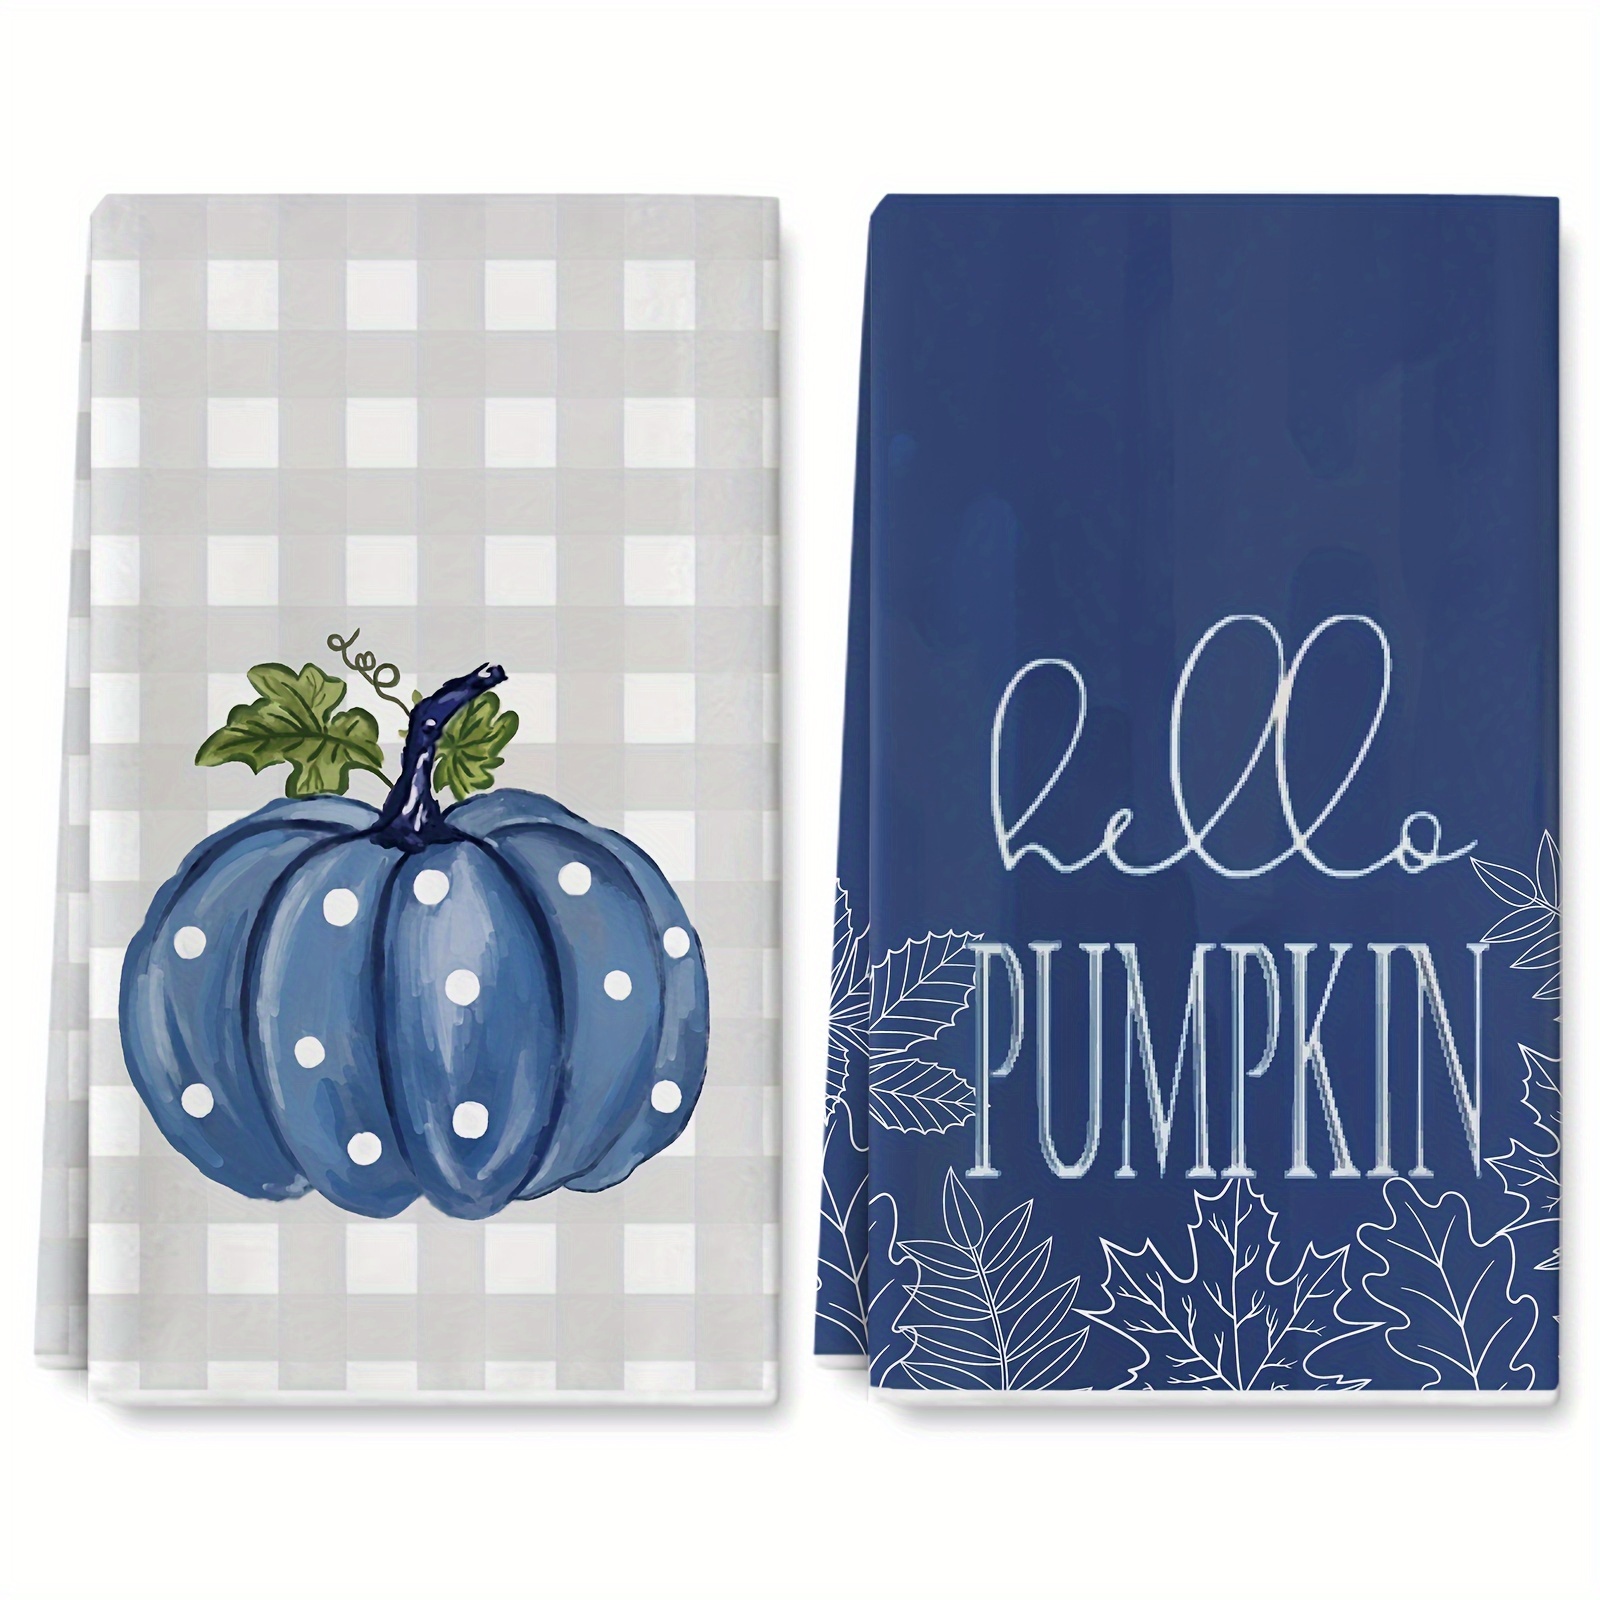 

2-piece Autumn Pumpkin Kitchen Towels - 18x28 Inch, Ultra-soft Polyester, Grey Plaid & Blue Pumpkins Design, Perfect For Thanksgiving Decor, Cooking, Baking & Cleaning